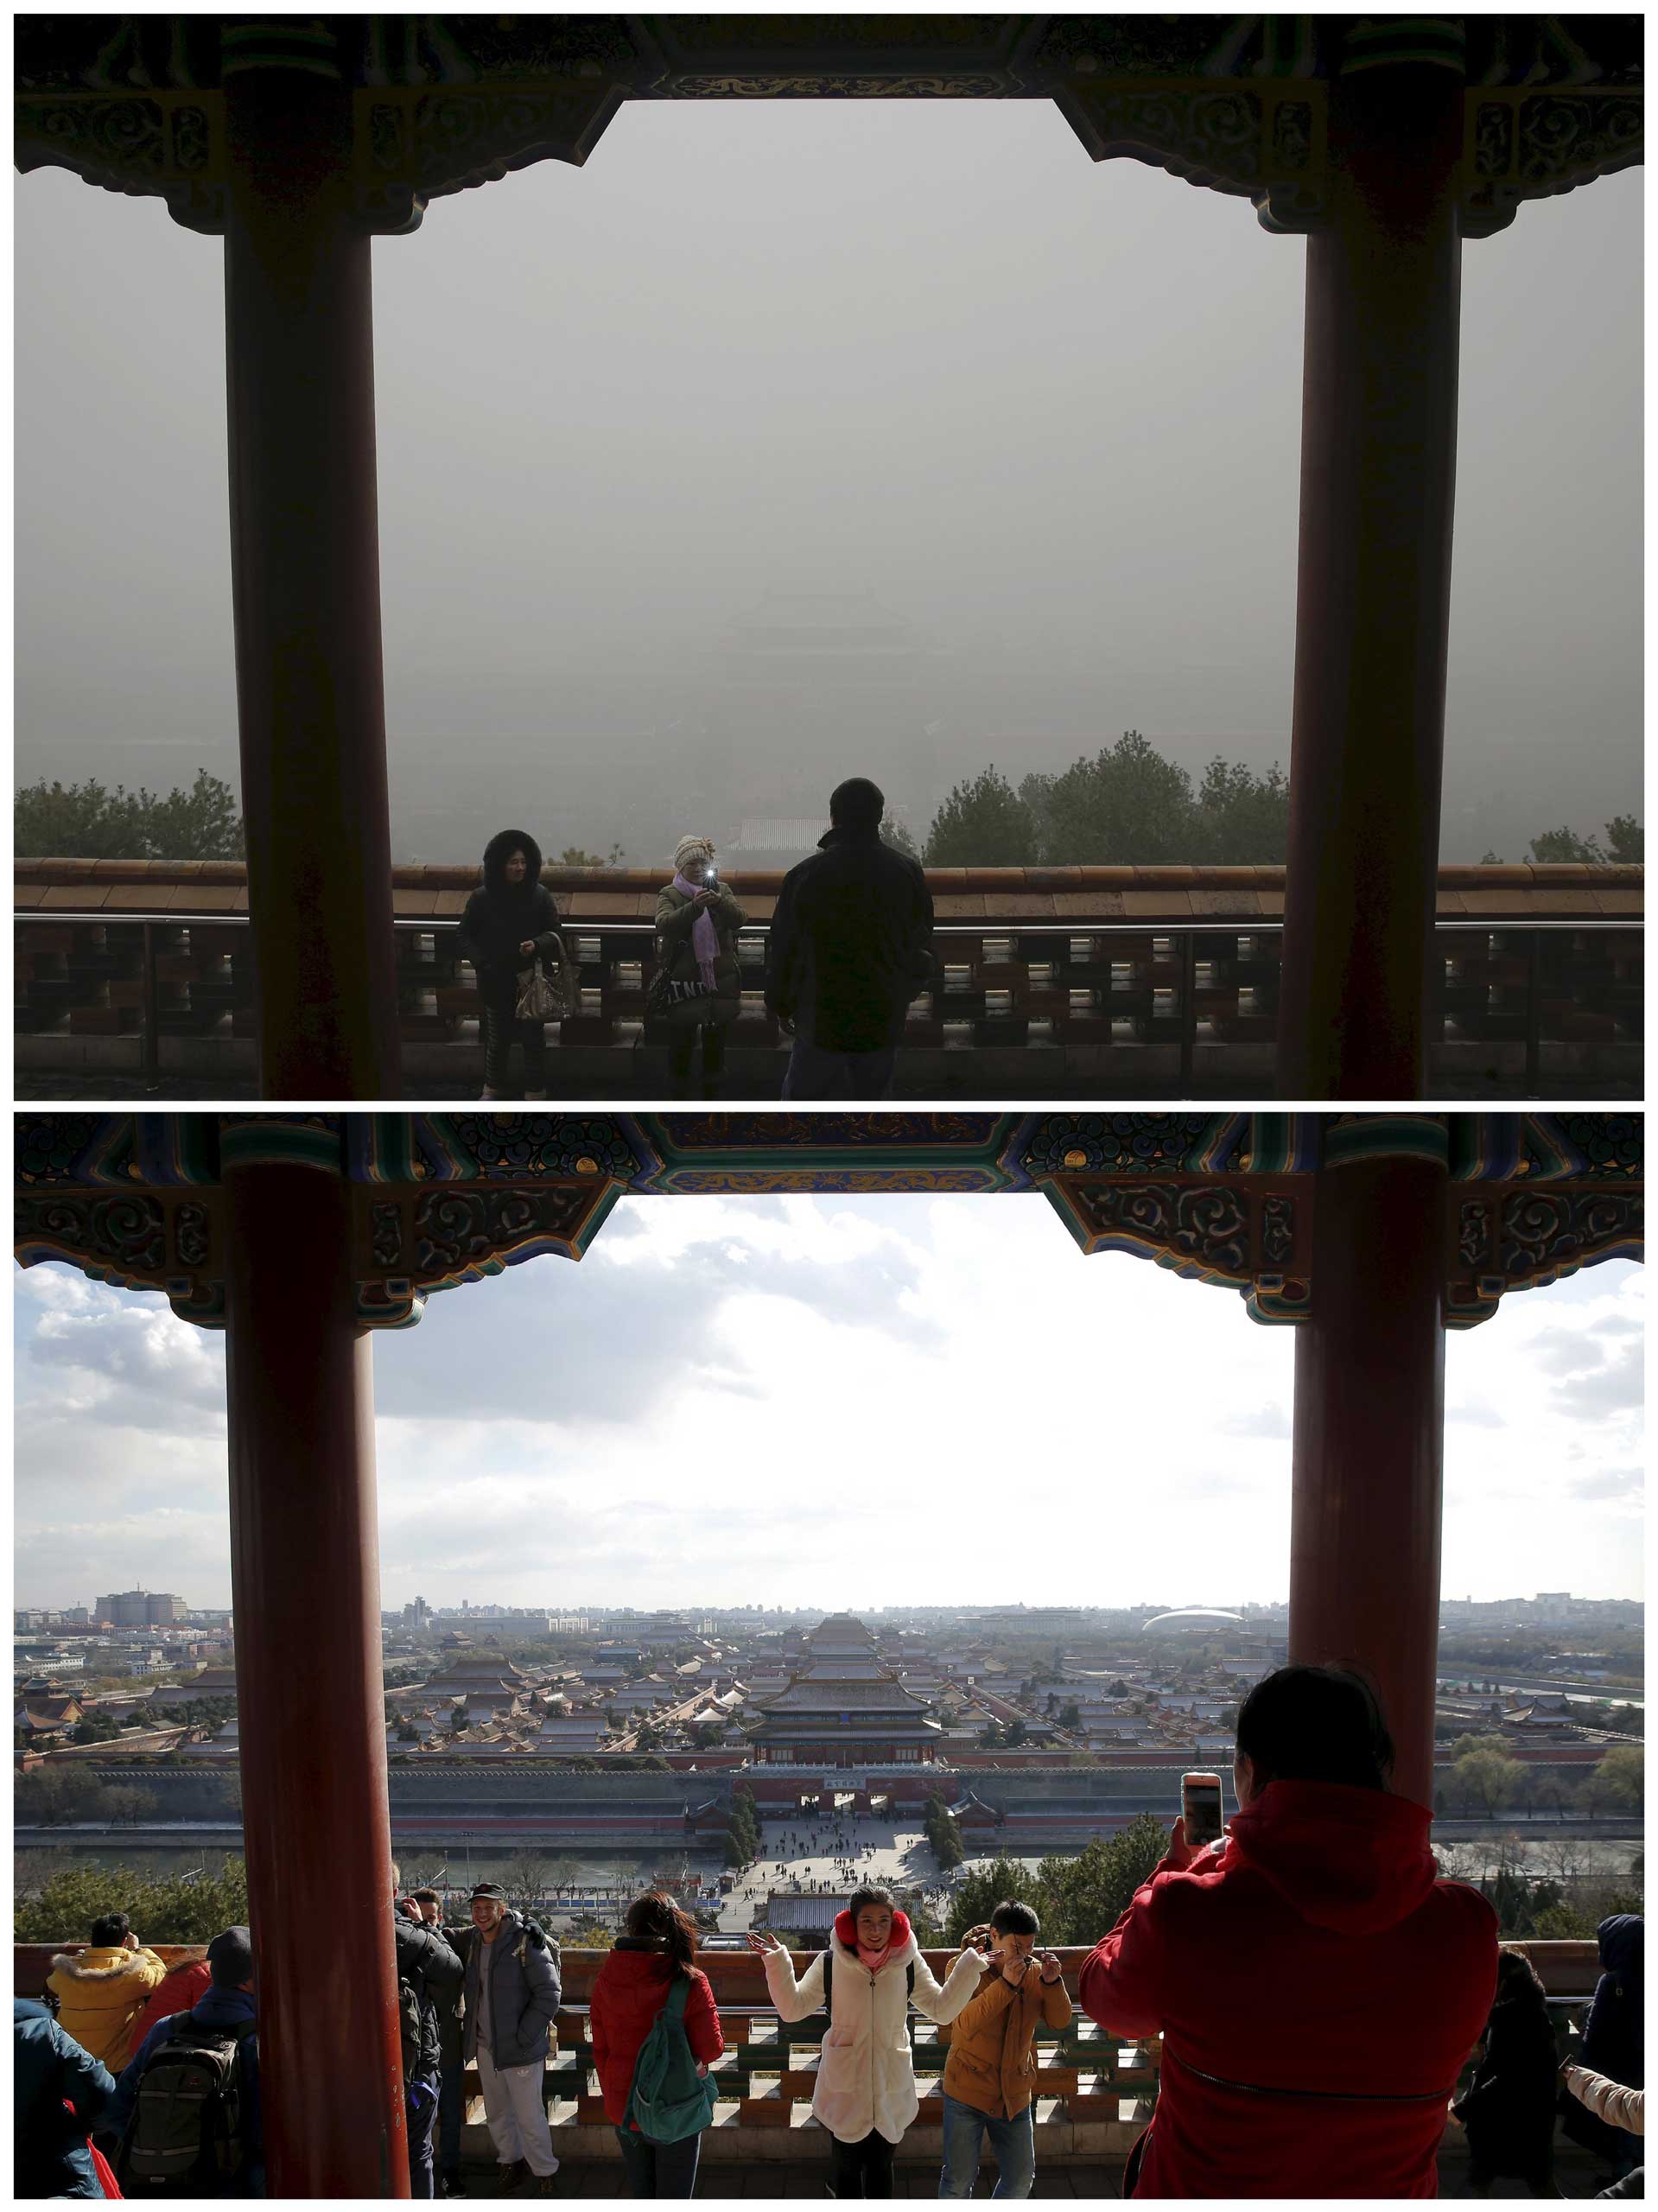 Visitors take pictures at the top of the Jingshan Park overseeing the Forbidden City on a smoggy day on Dec. 1, and a day later.